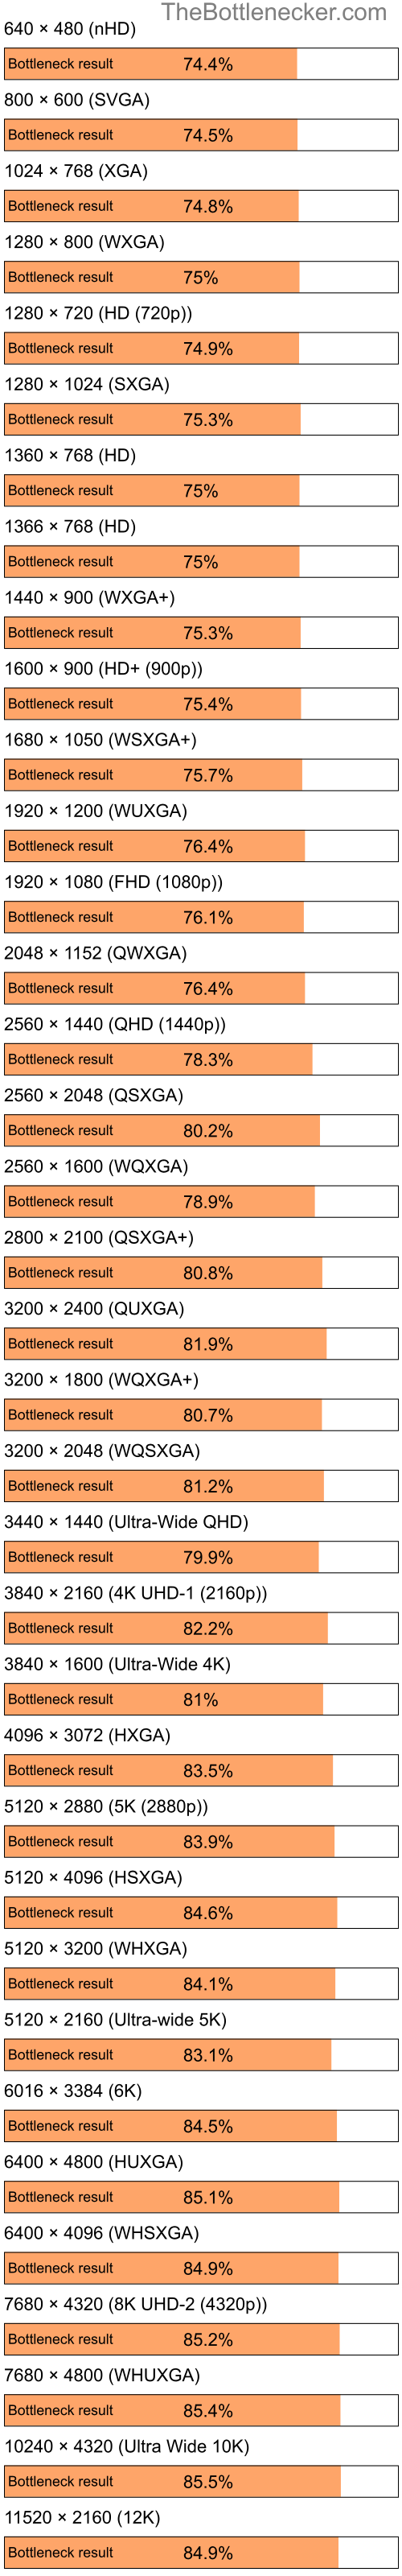 Bottleneck results by resolution for Intel Atom Z520 and AMD Radeon X1550 in Graphic Card Intense Tasks